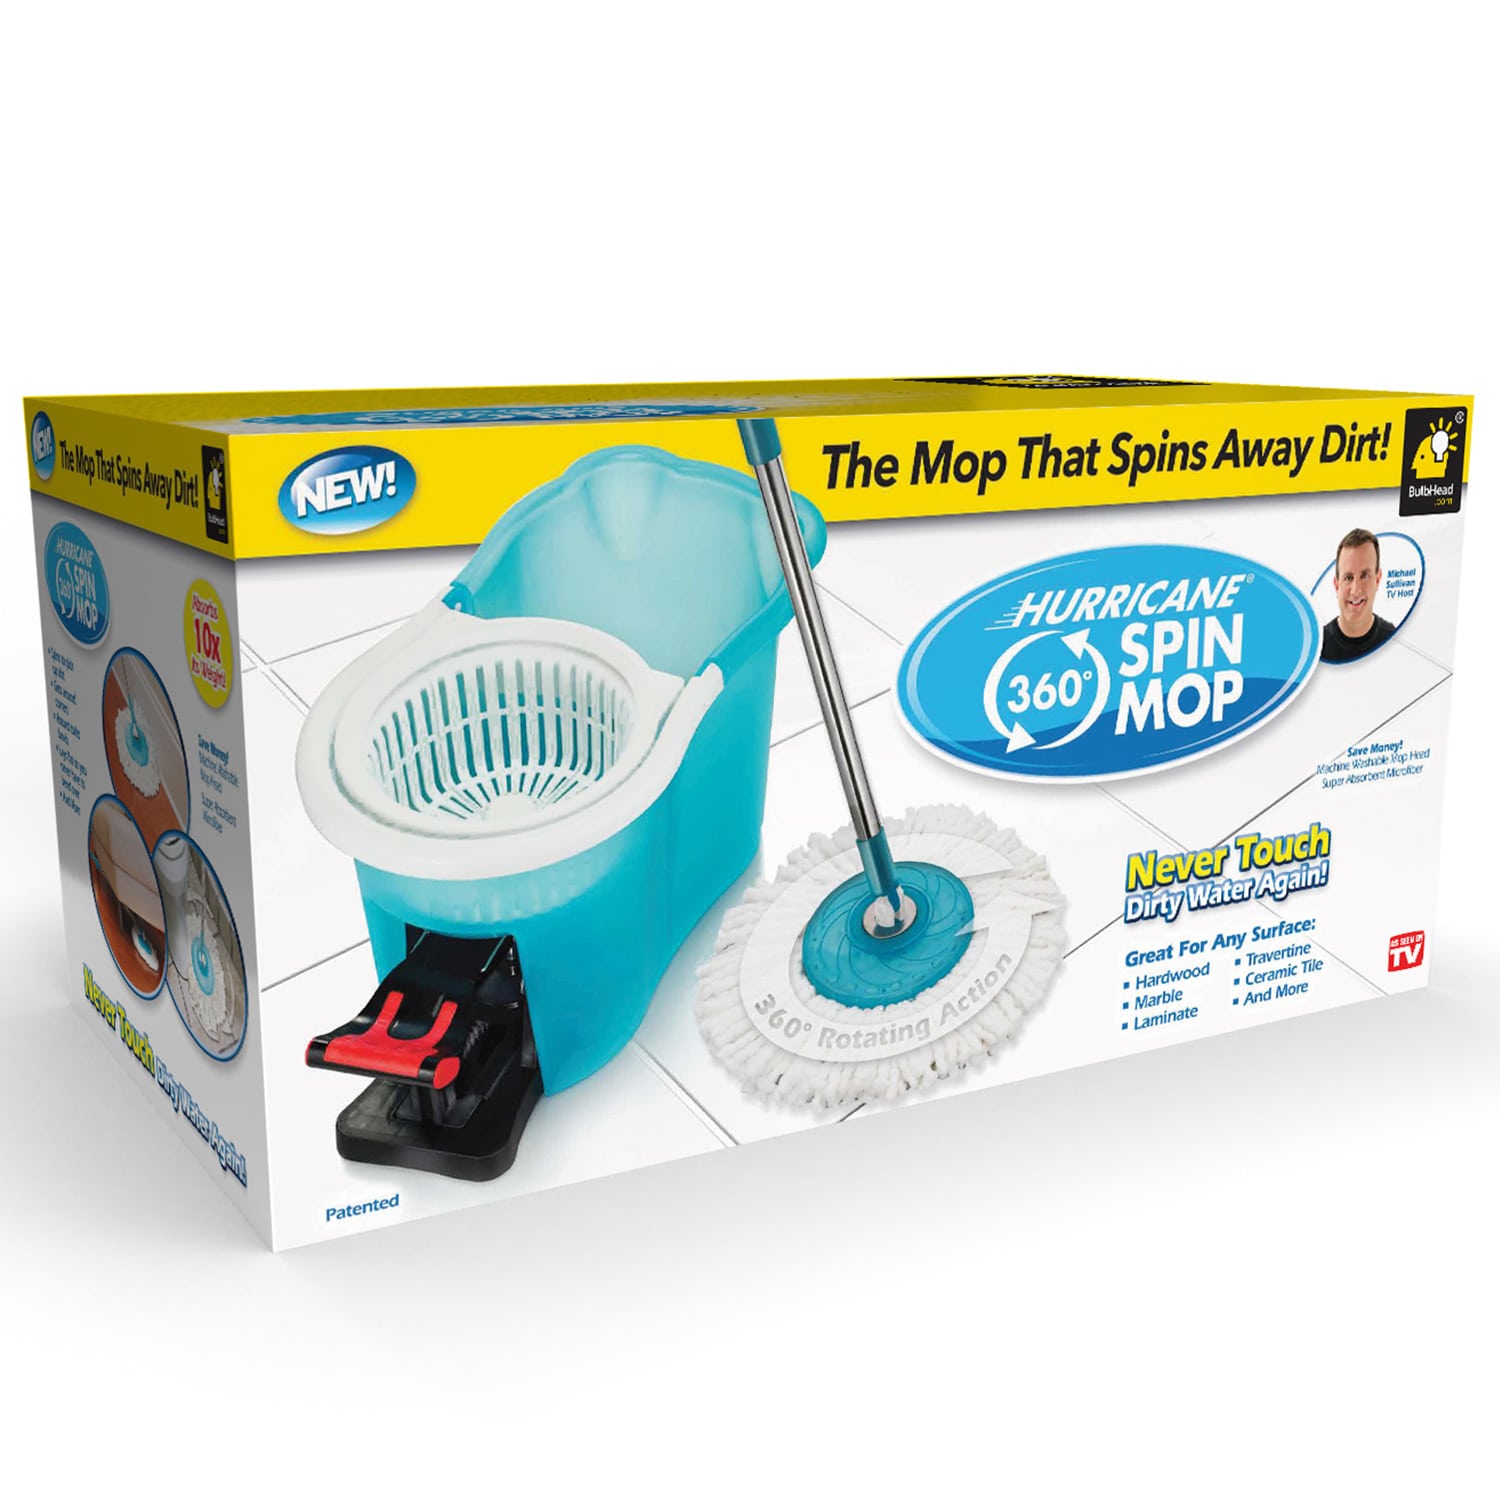 Hurricane Spin Mop As Seen On TV Mop & Bucket Cleaning System by BulbHead - image 4 of 9